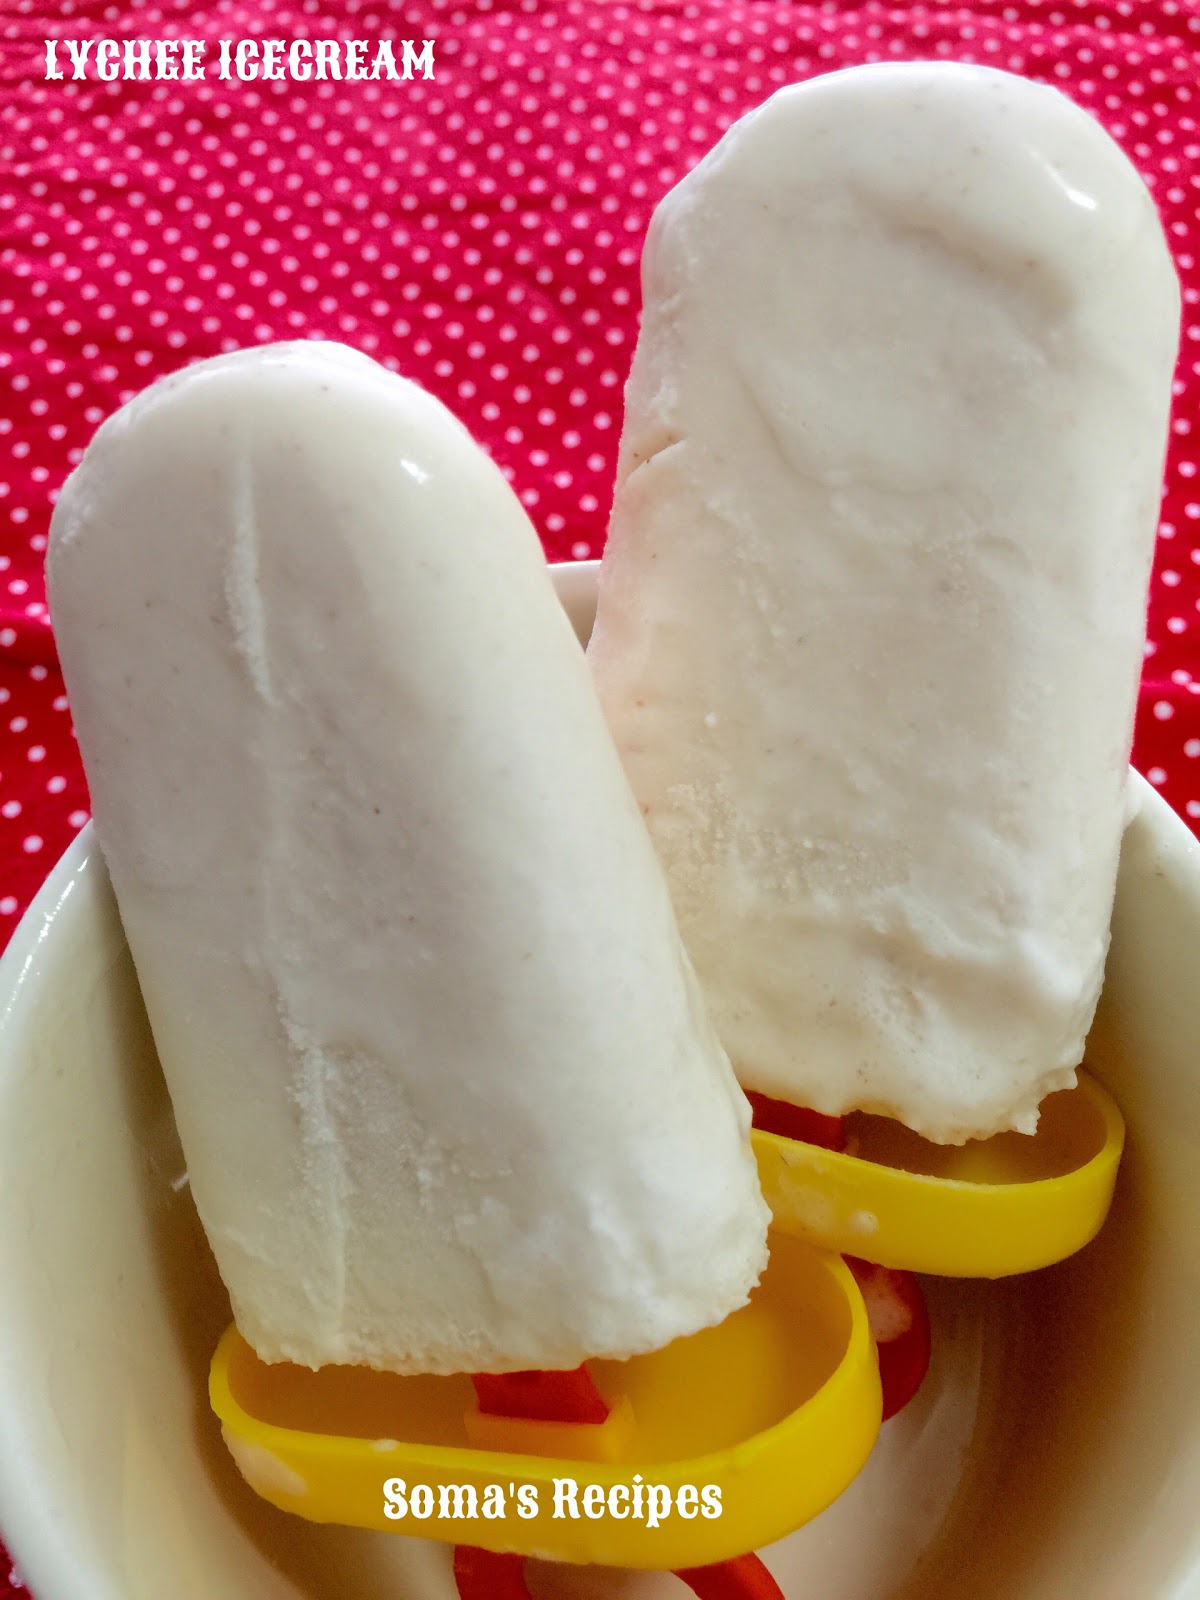 CURRY AND SPICE: LYCHEE ICE-CREAM